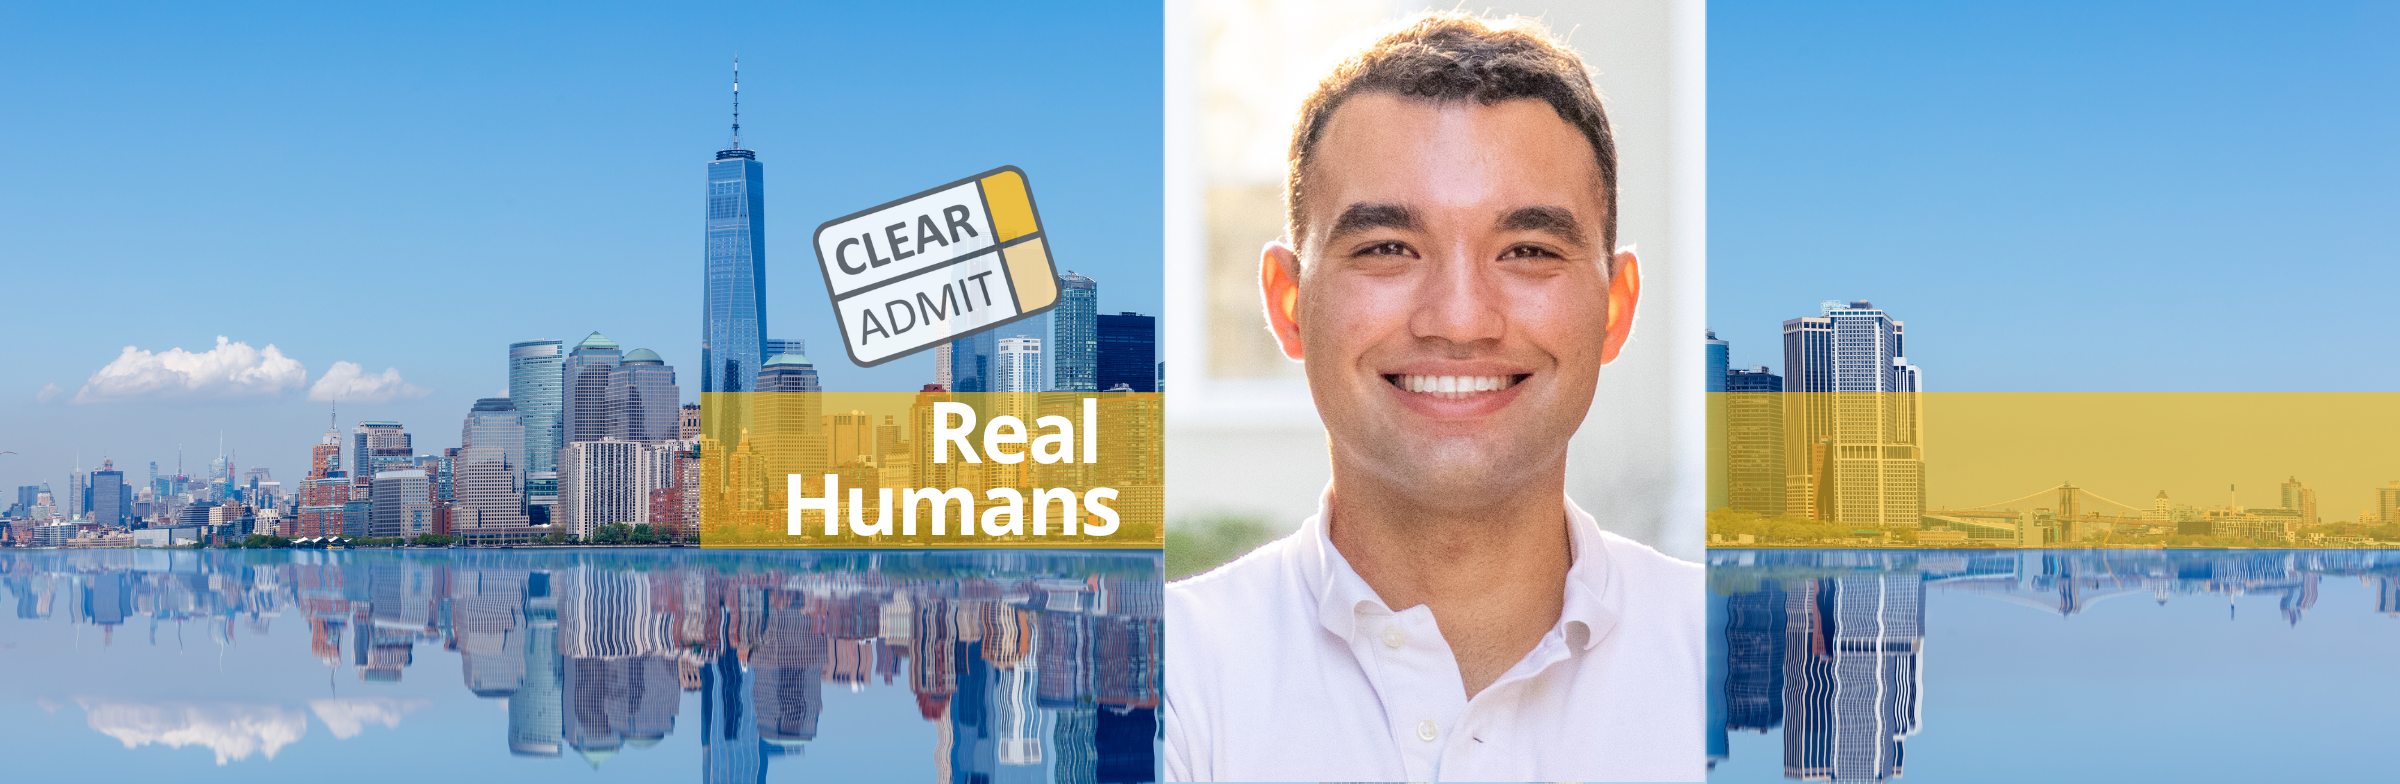 Image for Real Humans of Deloitte: Ryan Flamerich, HBS MBA ’21, Senior Consultant